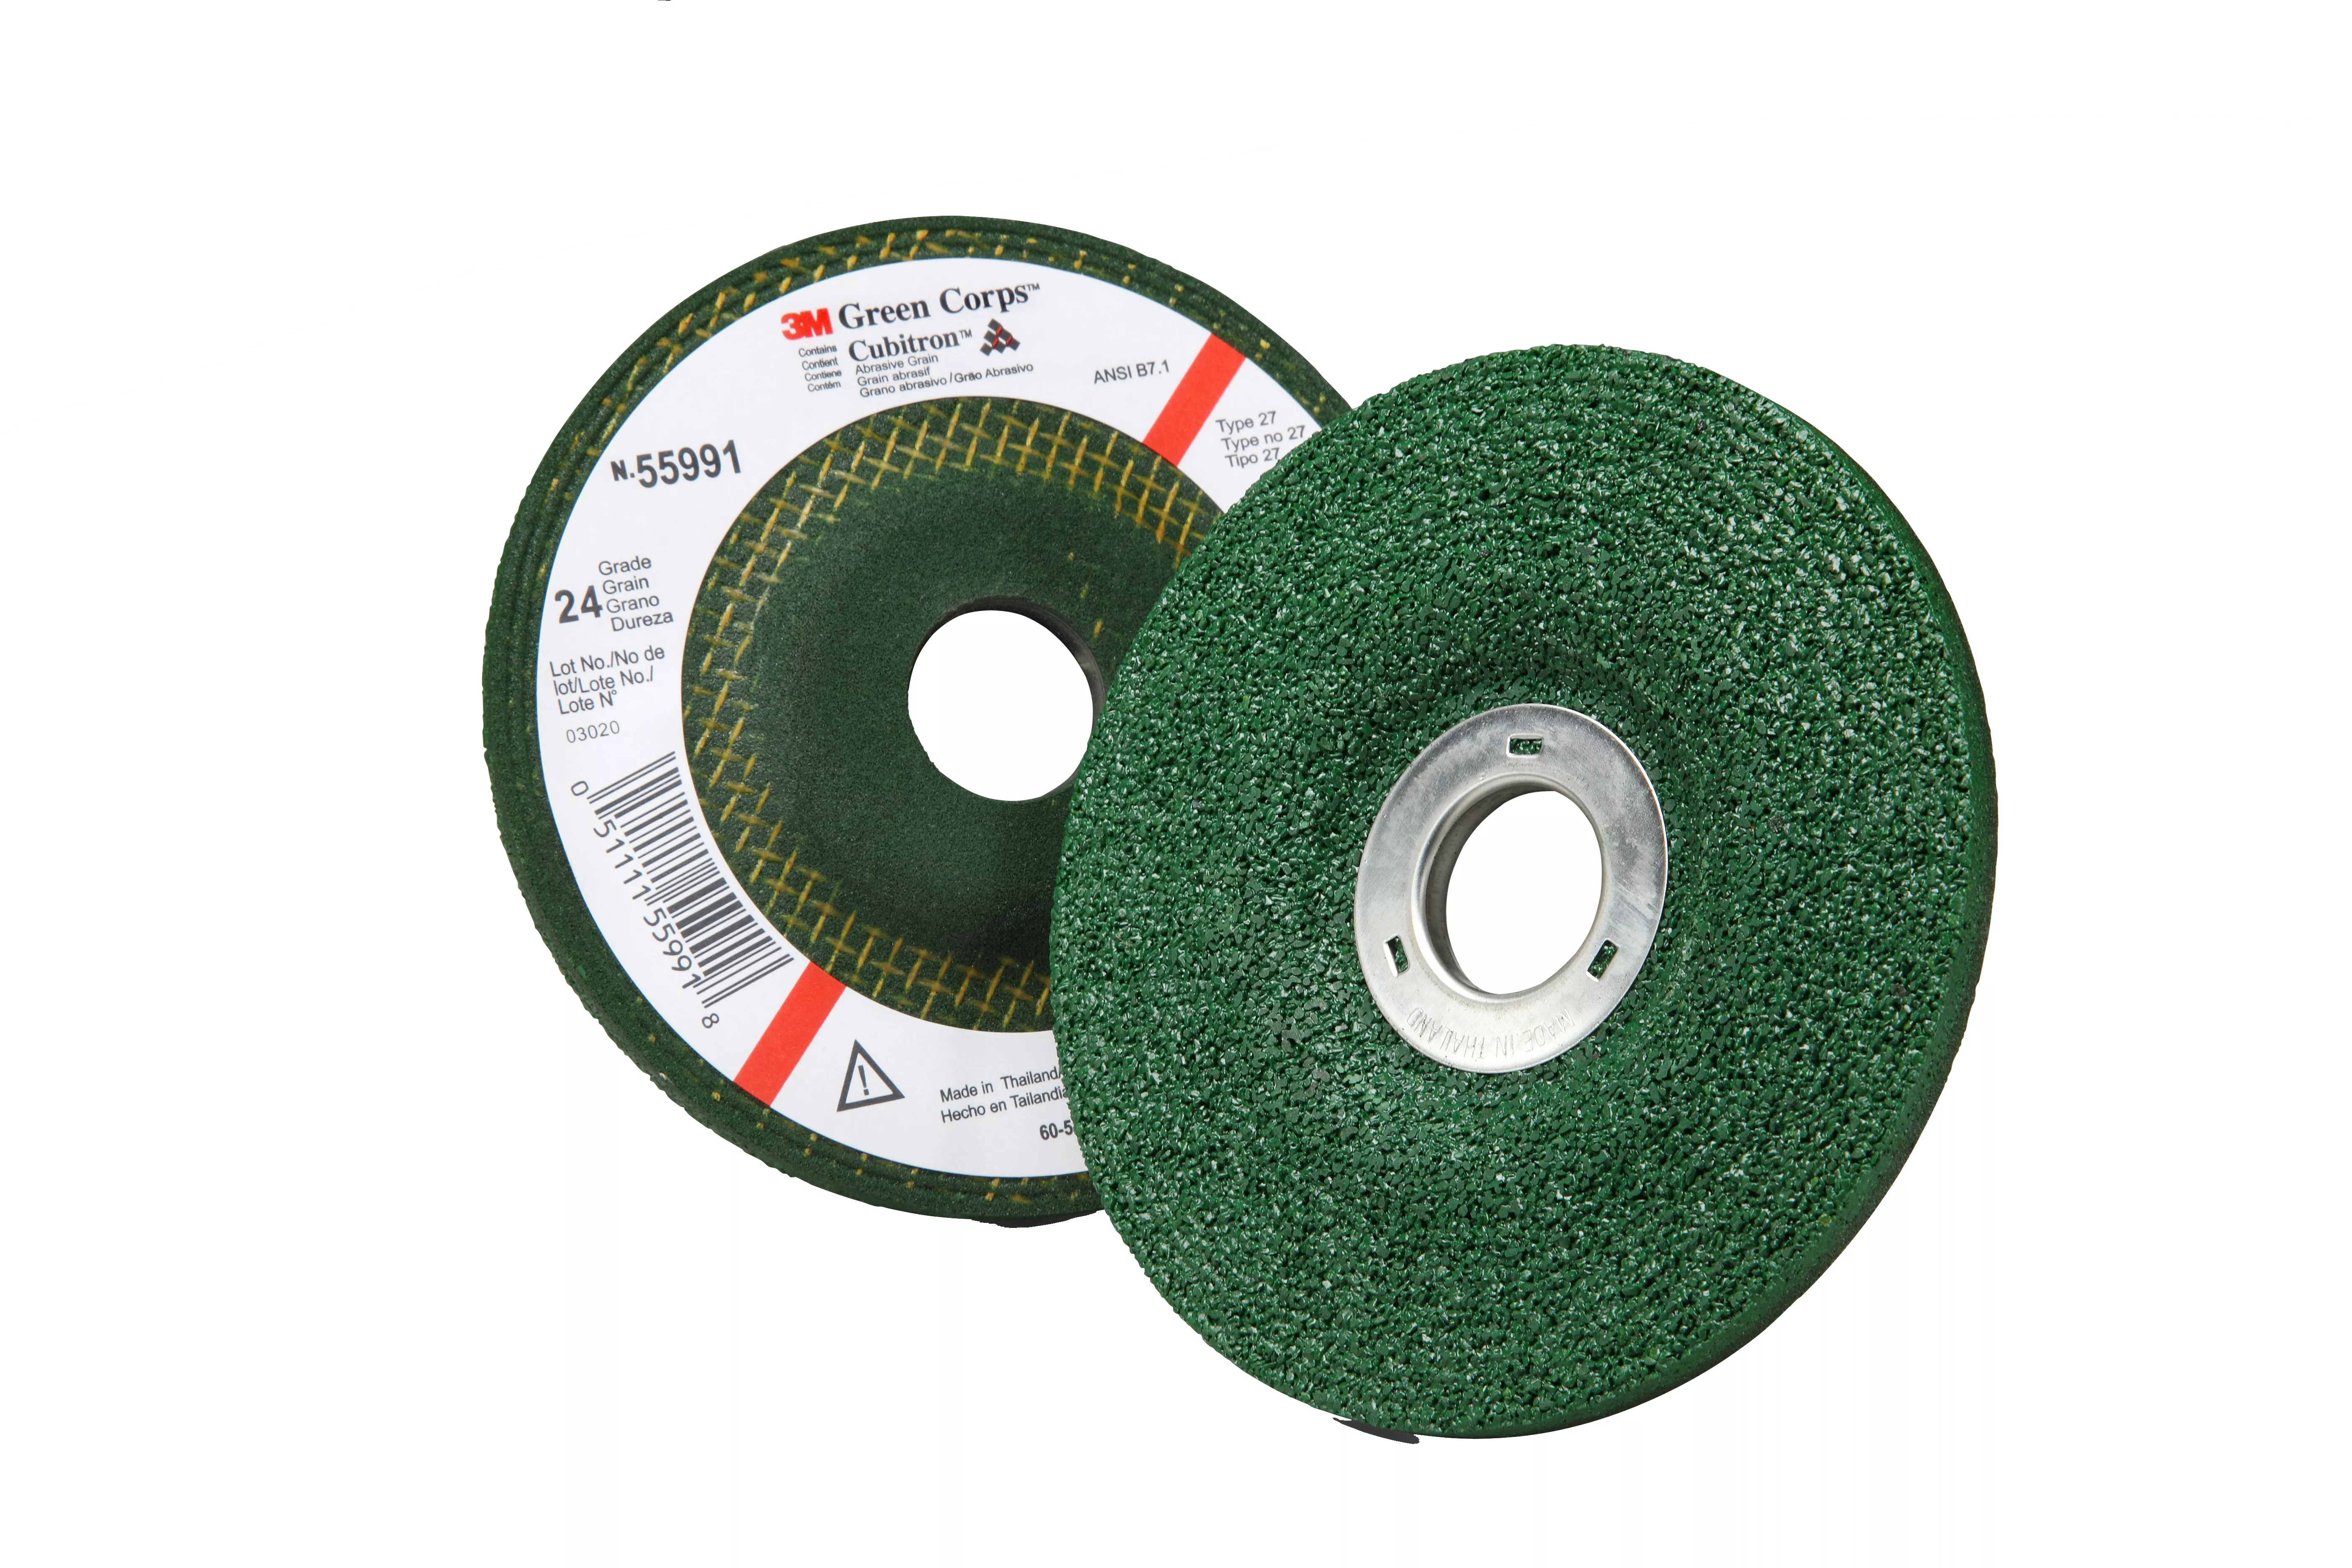 3M™ Green Corps™ Depressed Center Grinding Wheel, 24 4-1/2 in x 1/4 in x
7/8 in, 10/Carton, 40 ea/Case